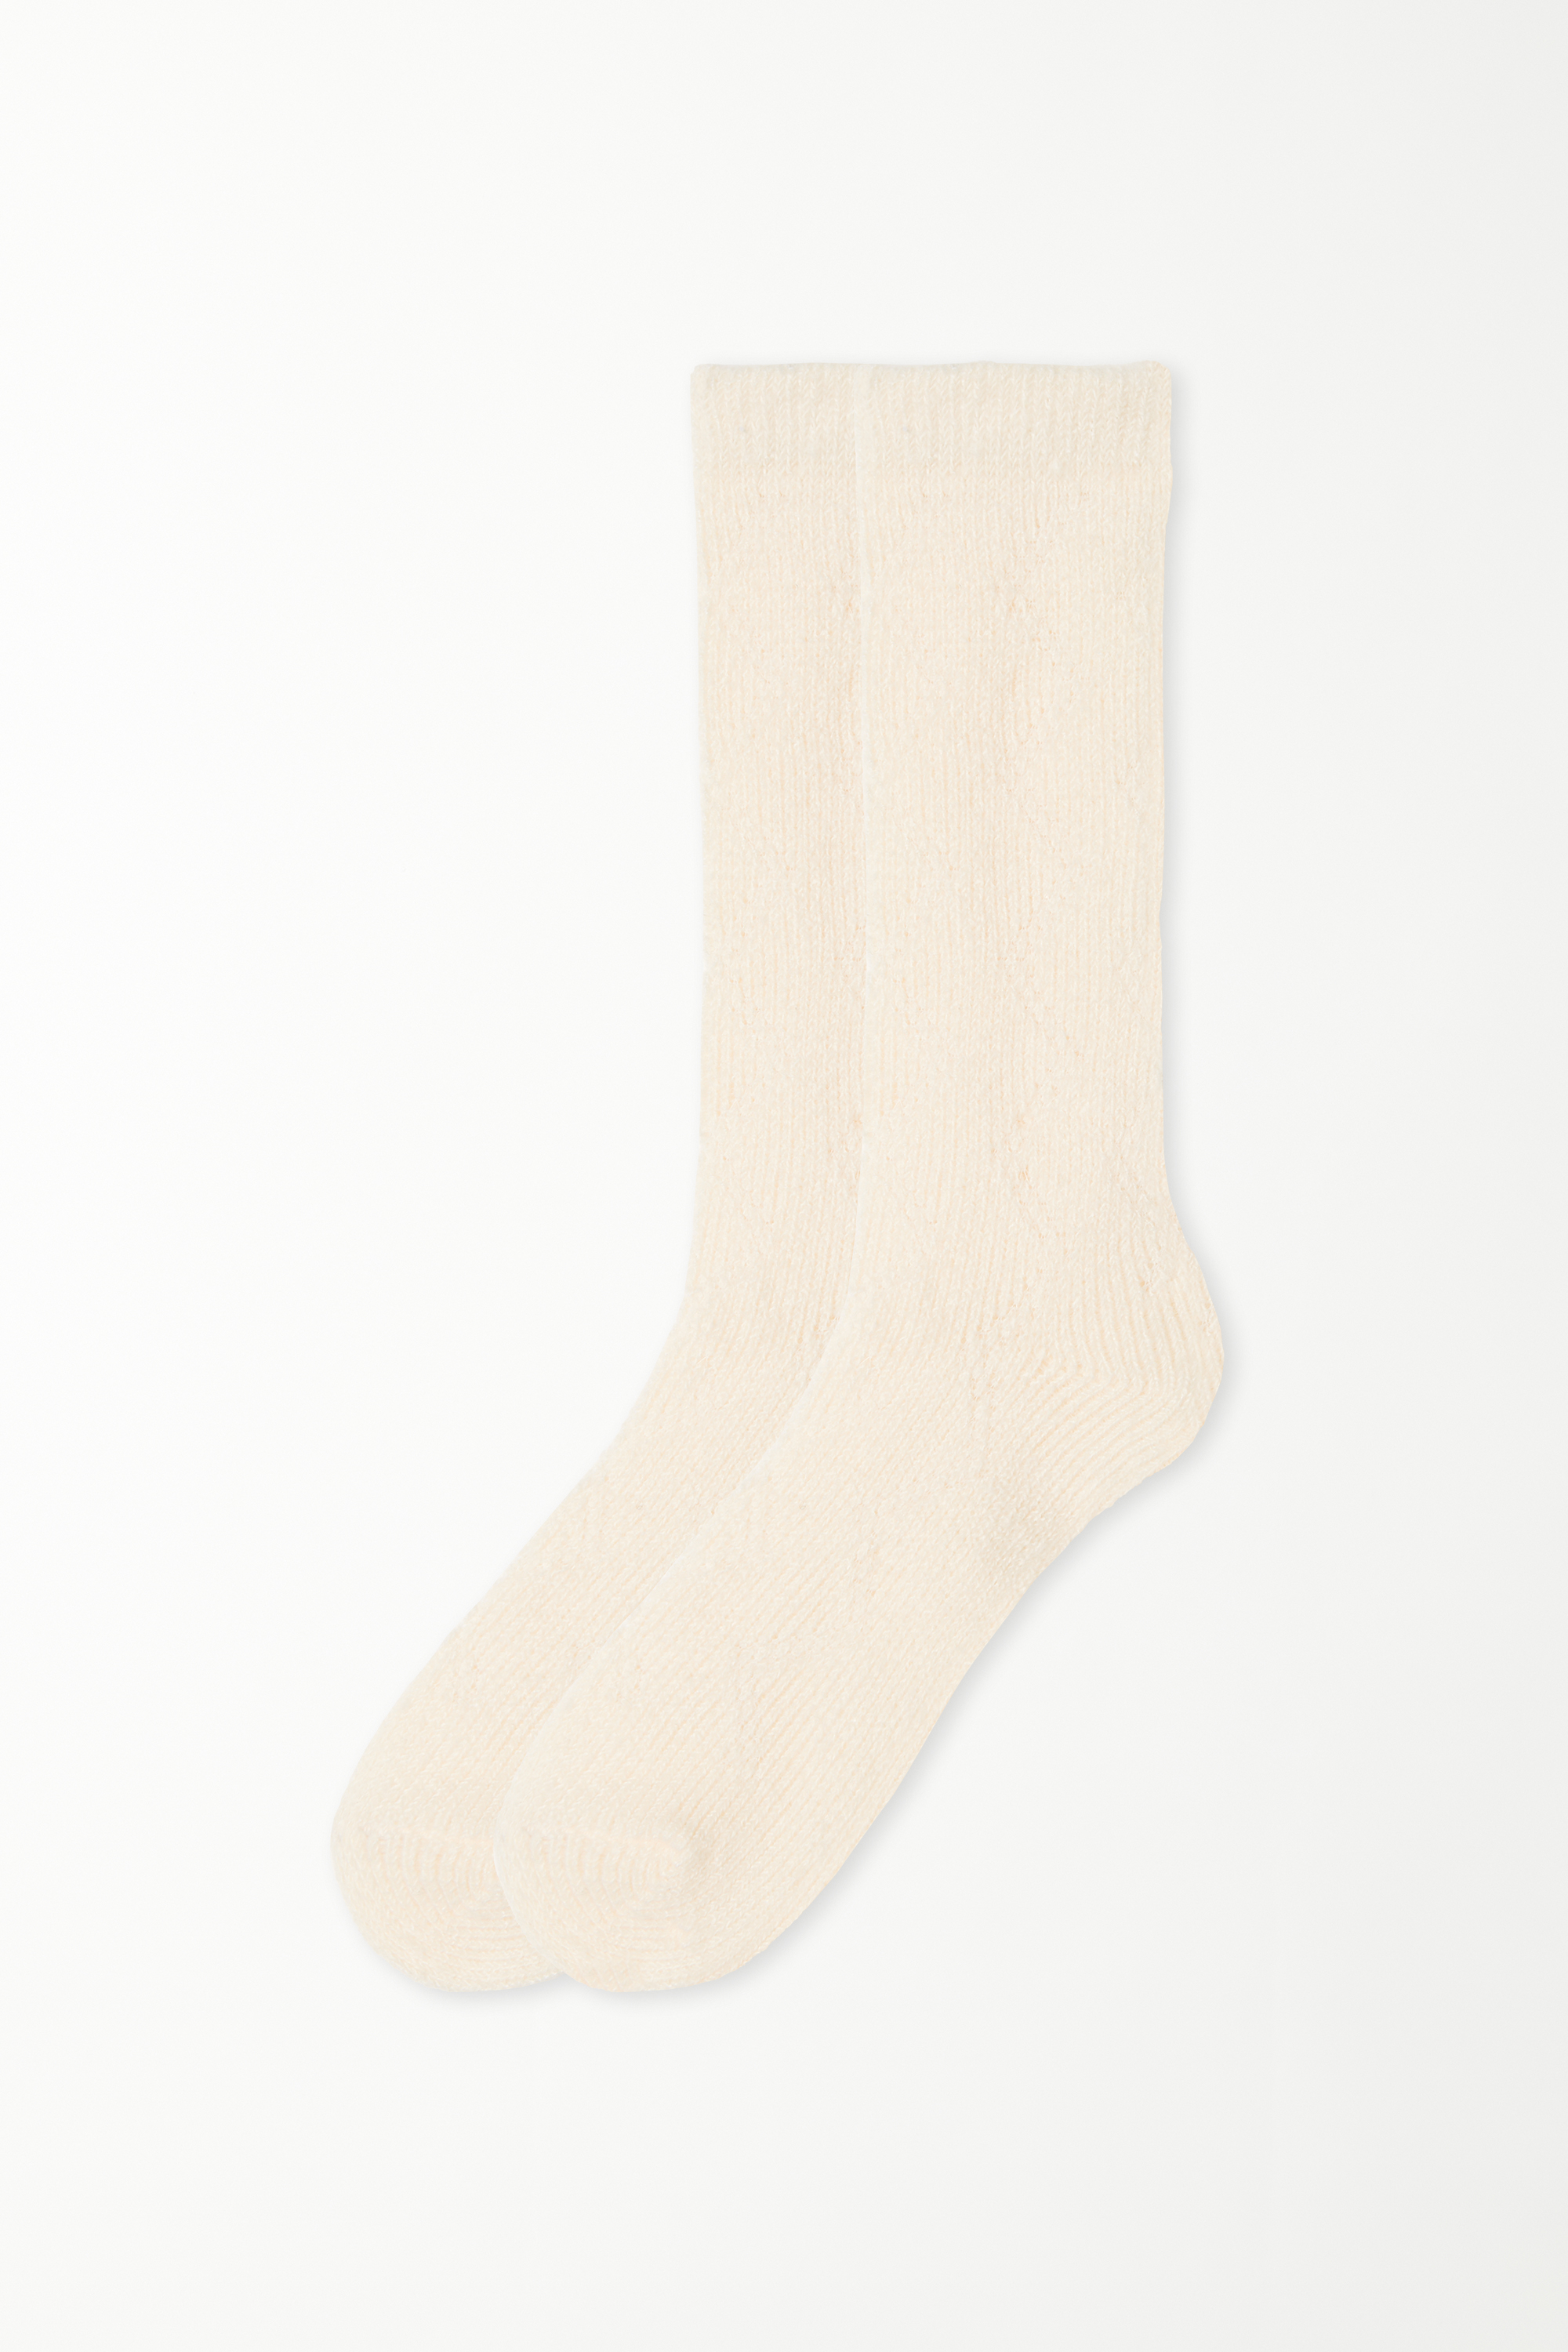 3/4 Length Thick Patterned Socks